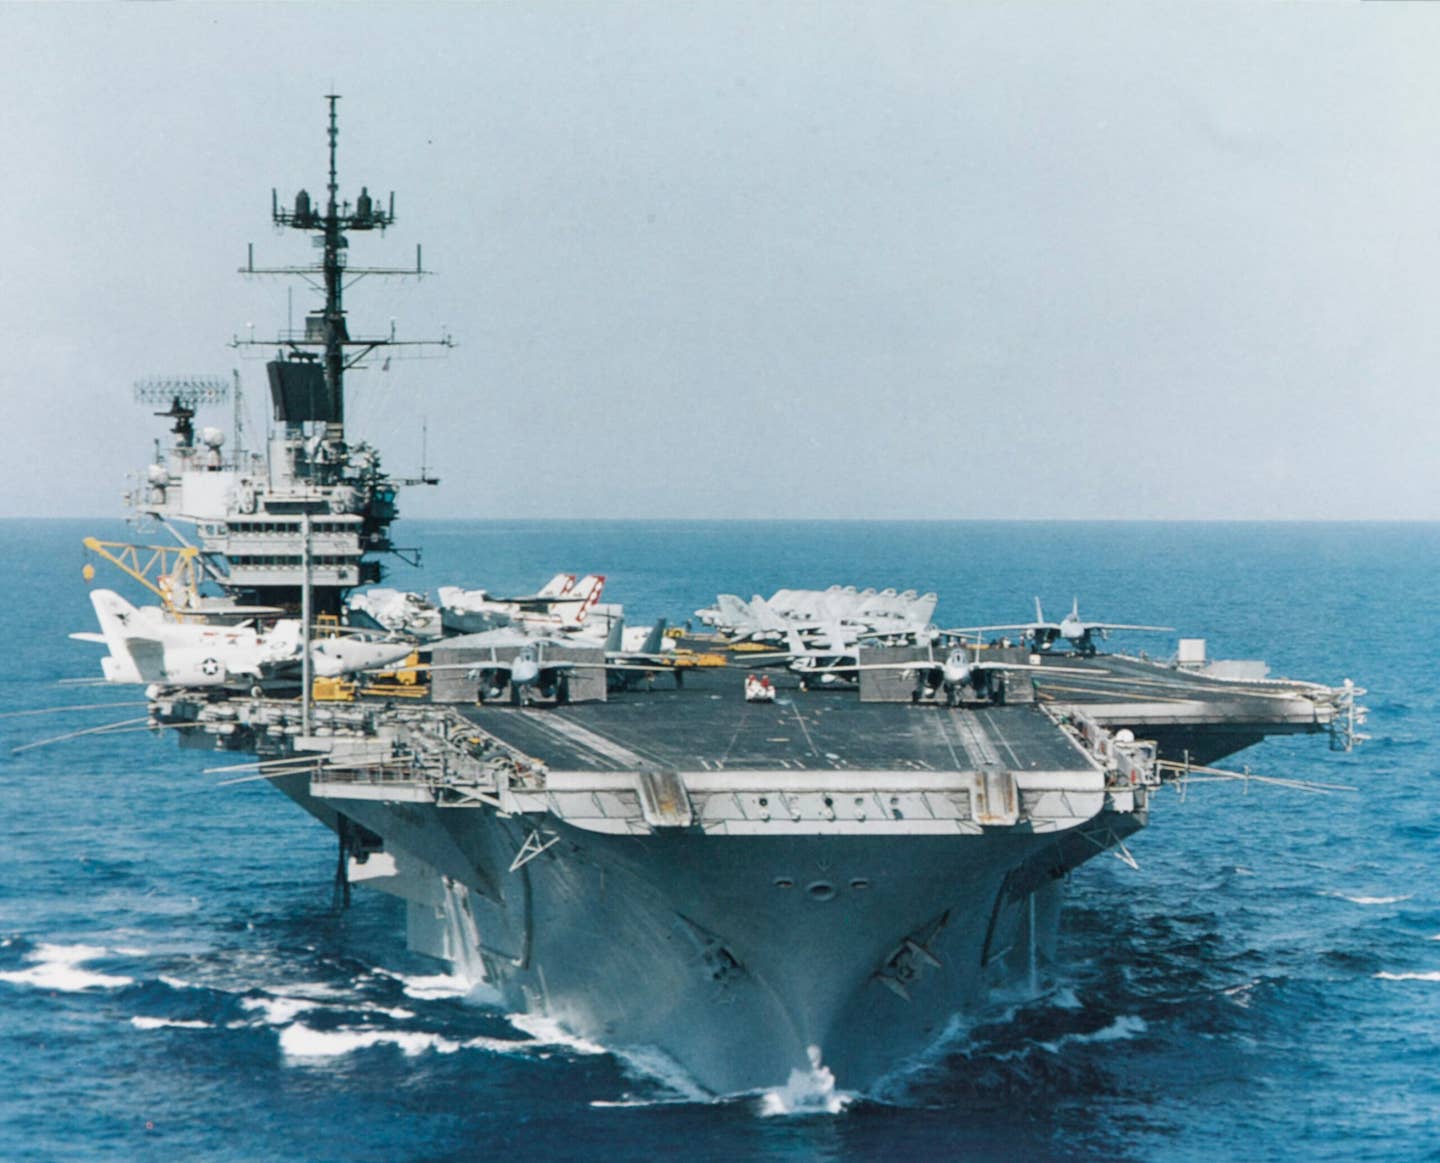 USS <em>Saratoga</em> (CV-60) underway with three F-14 fighters on her bow and waist catapults during operations in the Mediterranean Sea, September 16, 1985. <em>Naval History and Heritage Command</em>